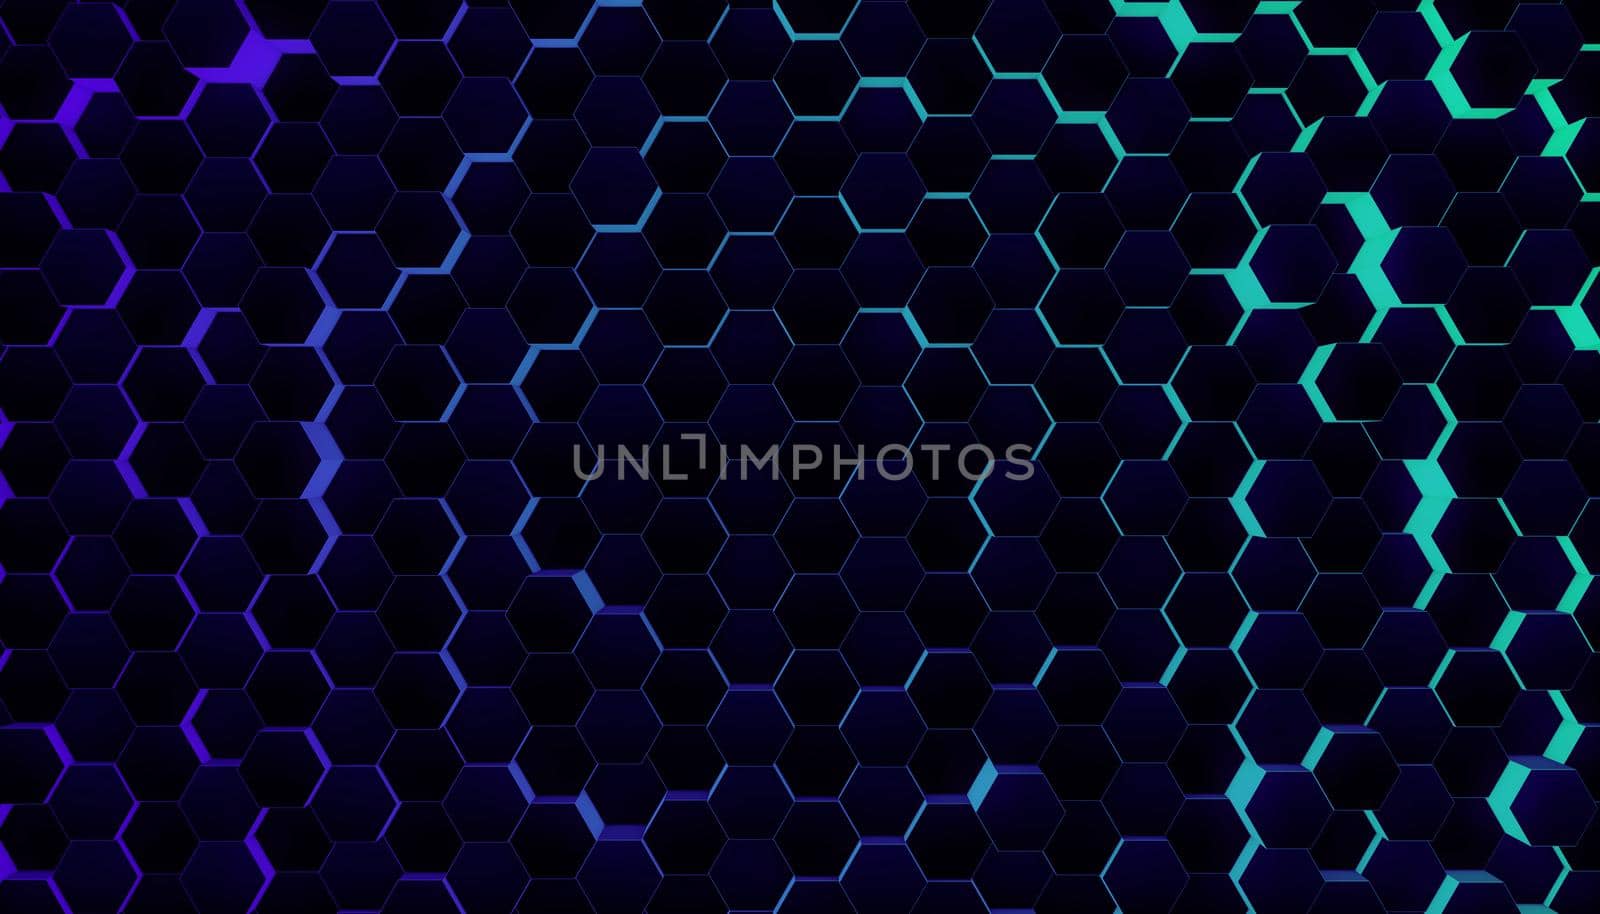 Wall of Random shifted neon honeycomb hexagon background wallpaper. by ImagesRouges